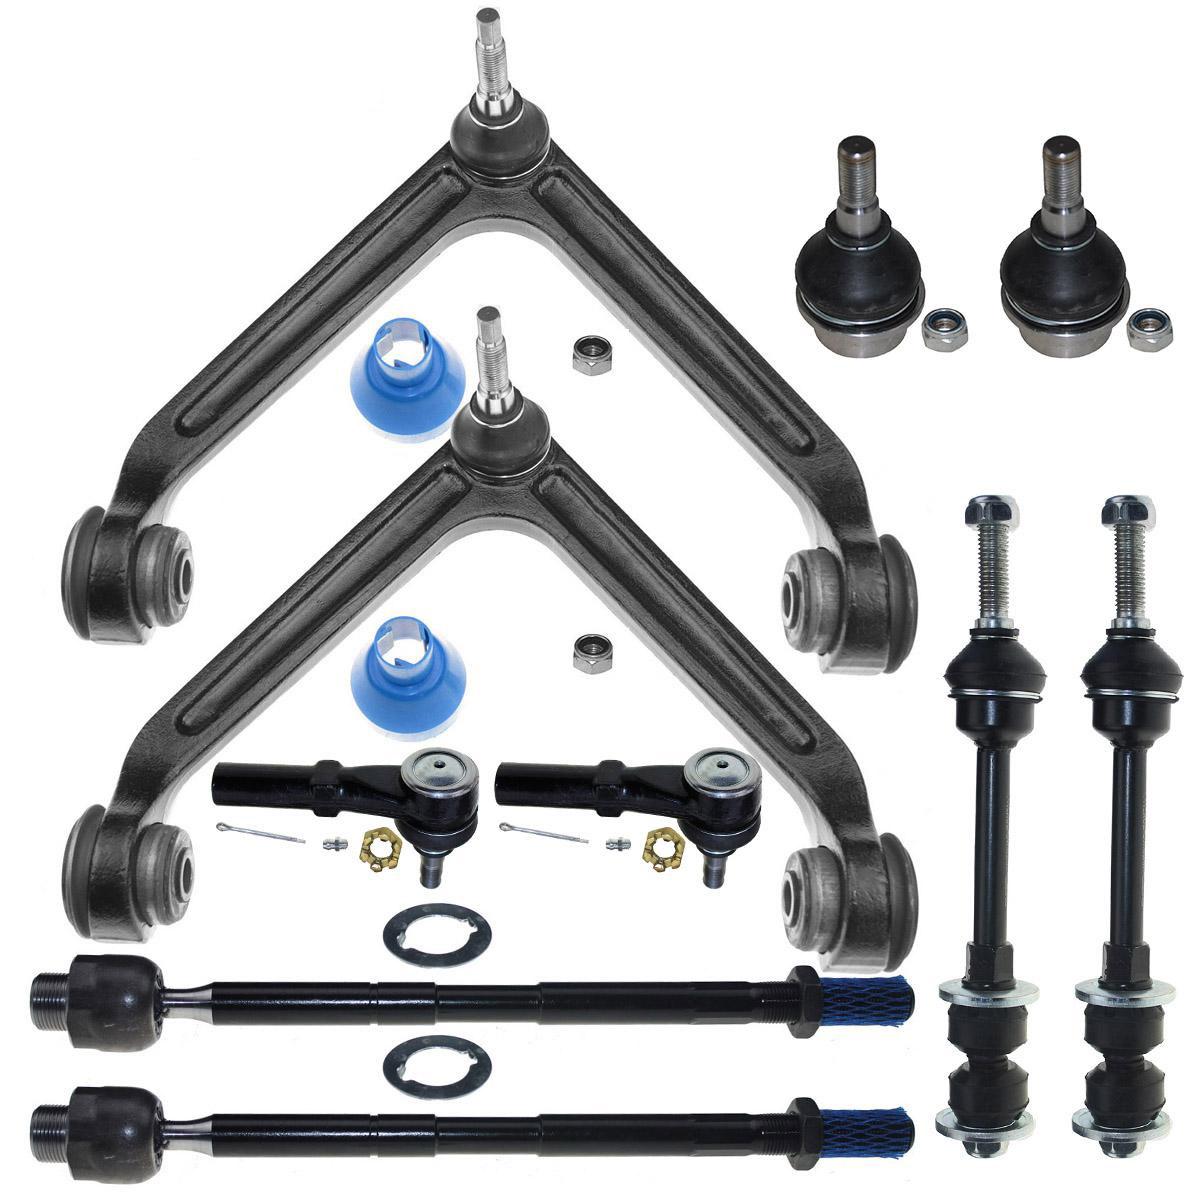 PartsW 10 Pc New Suspension Kit for Dodge Ram 1500 & Ram 1500 / Front Lower Ball Joints Bellow Boots Inner and Outer Tie Rod End Sway Bars End Link 